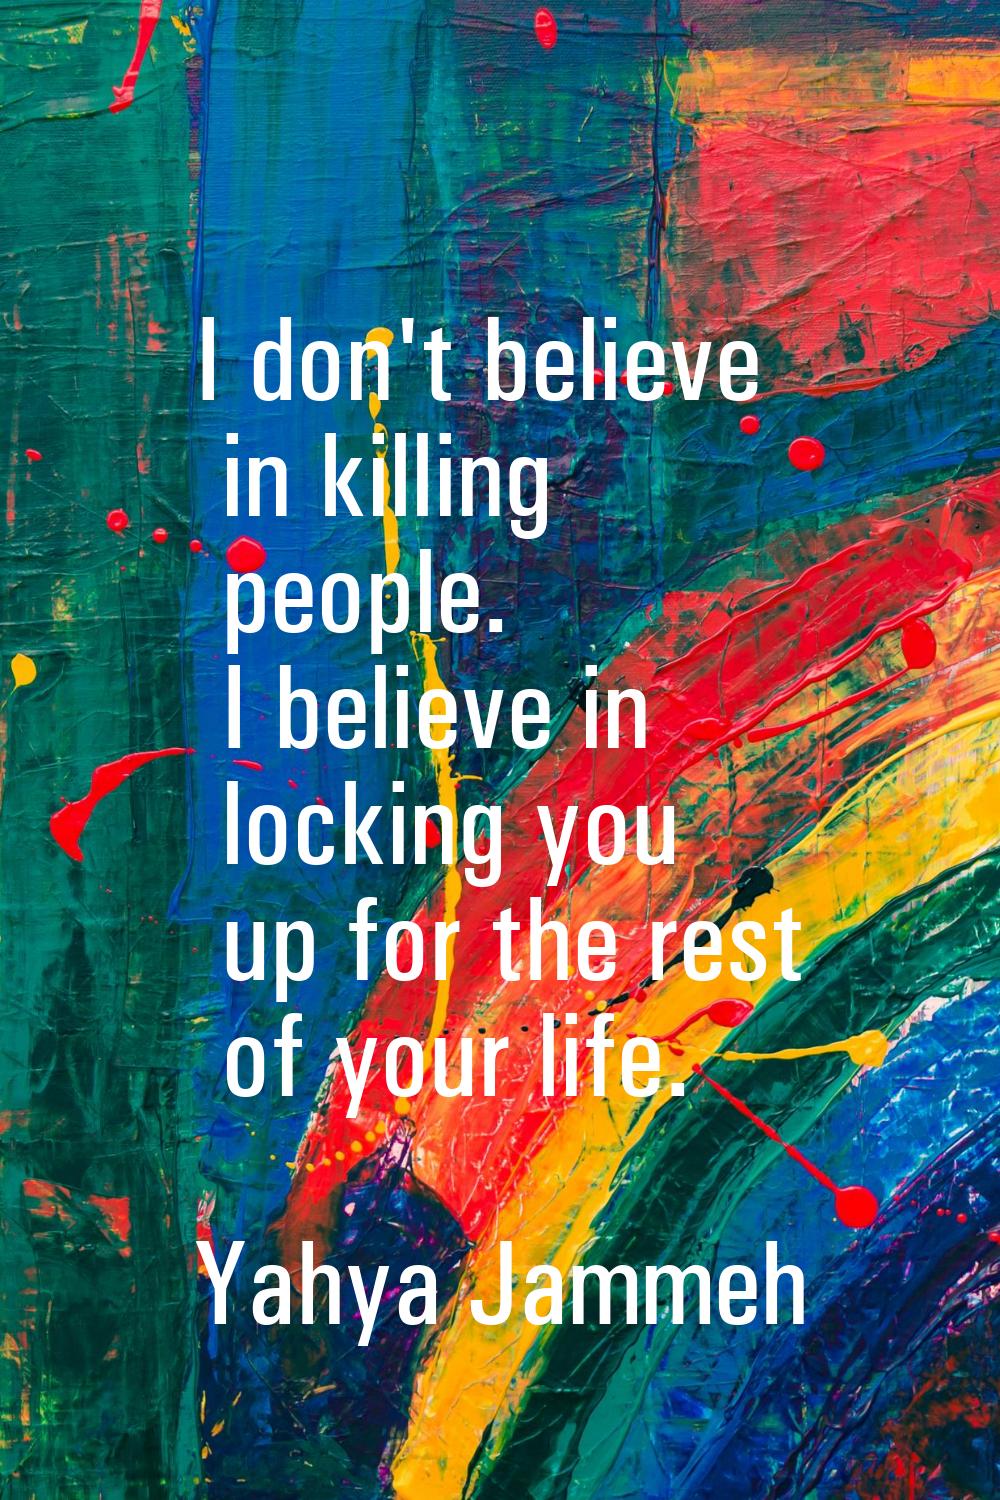 I don't believe in killing people. I believe in locking you up for the rest of your life.